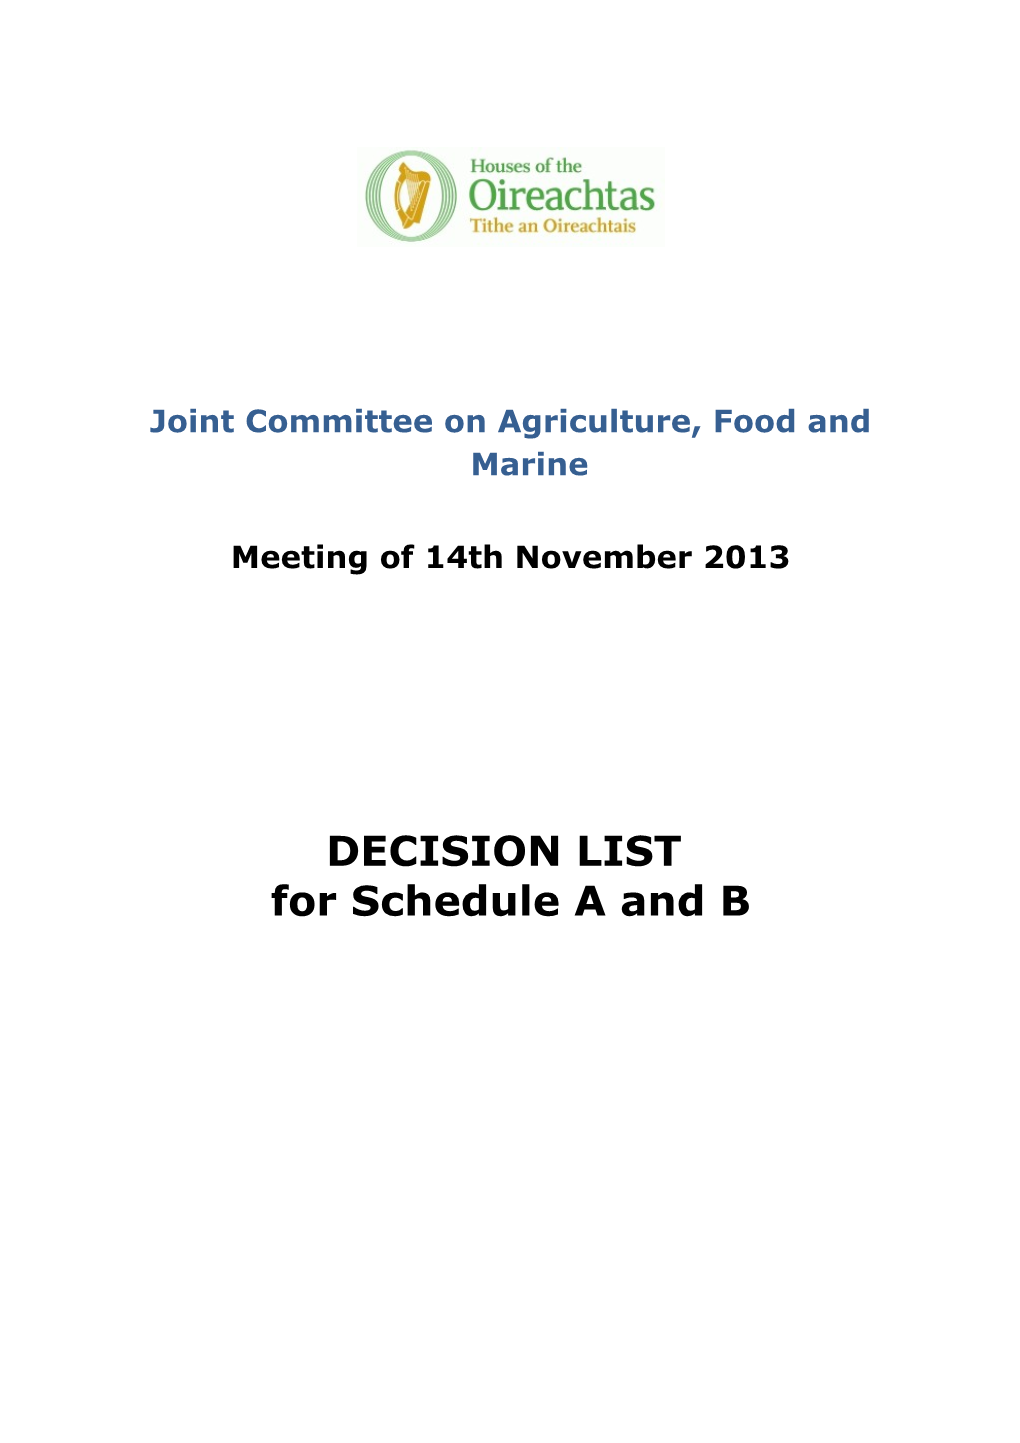 Joint Committee on Agriculture, Food and Marine